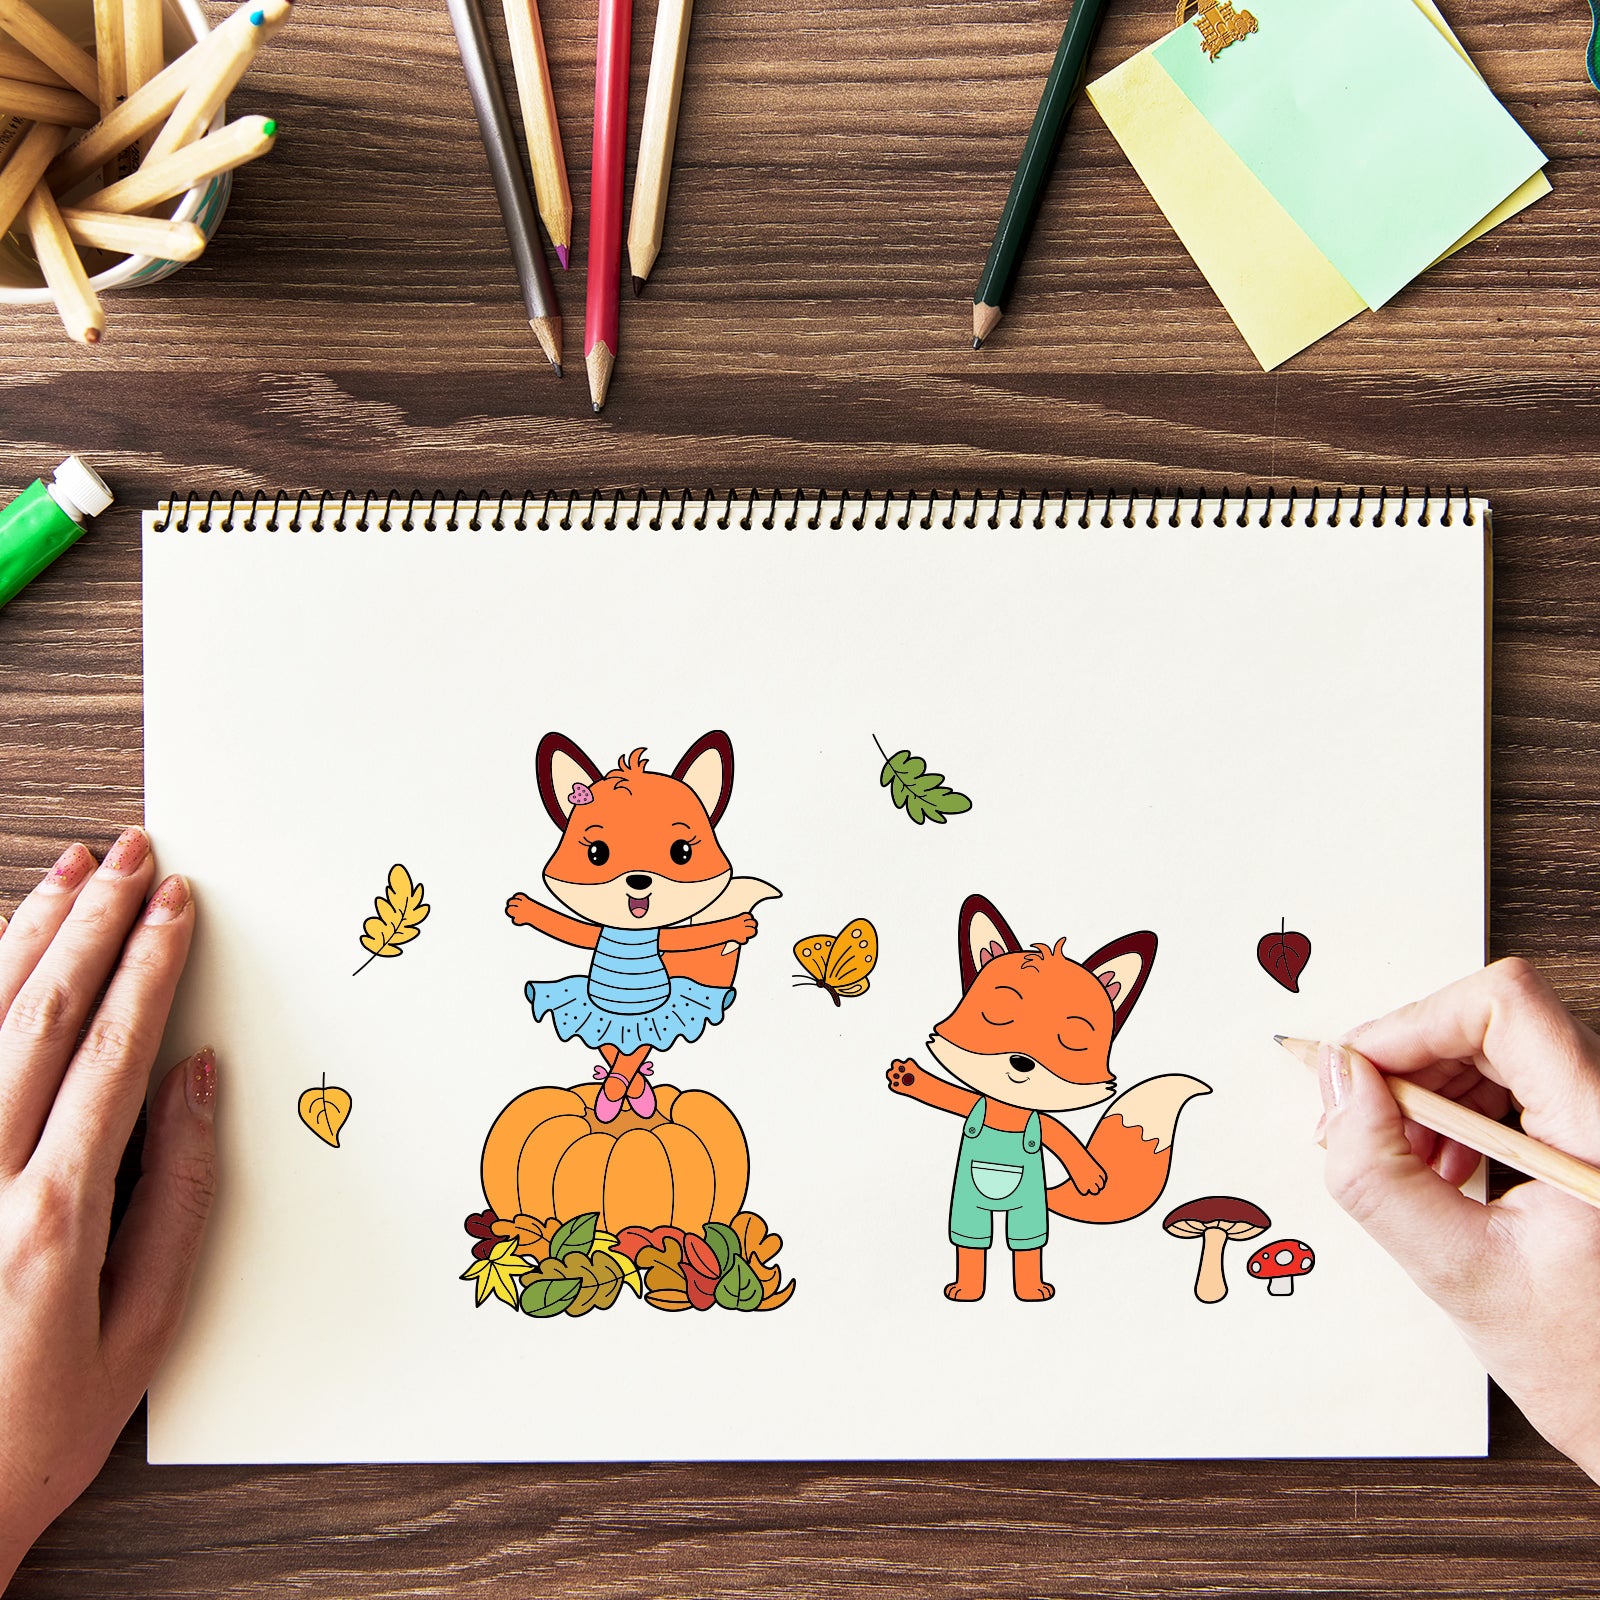 Globleland Fox, Twigs, Tire Swing, Fallen Leaves, Mushrooms, Pumpkins, Flowers Clear Silicone Stamp Seal for Card Making Decoration and DIY Scrapbooking